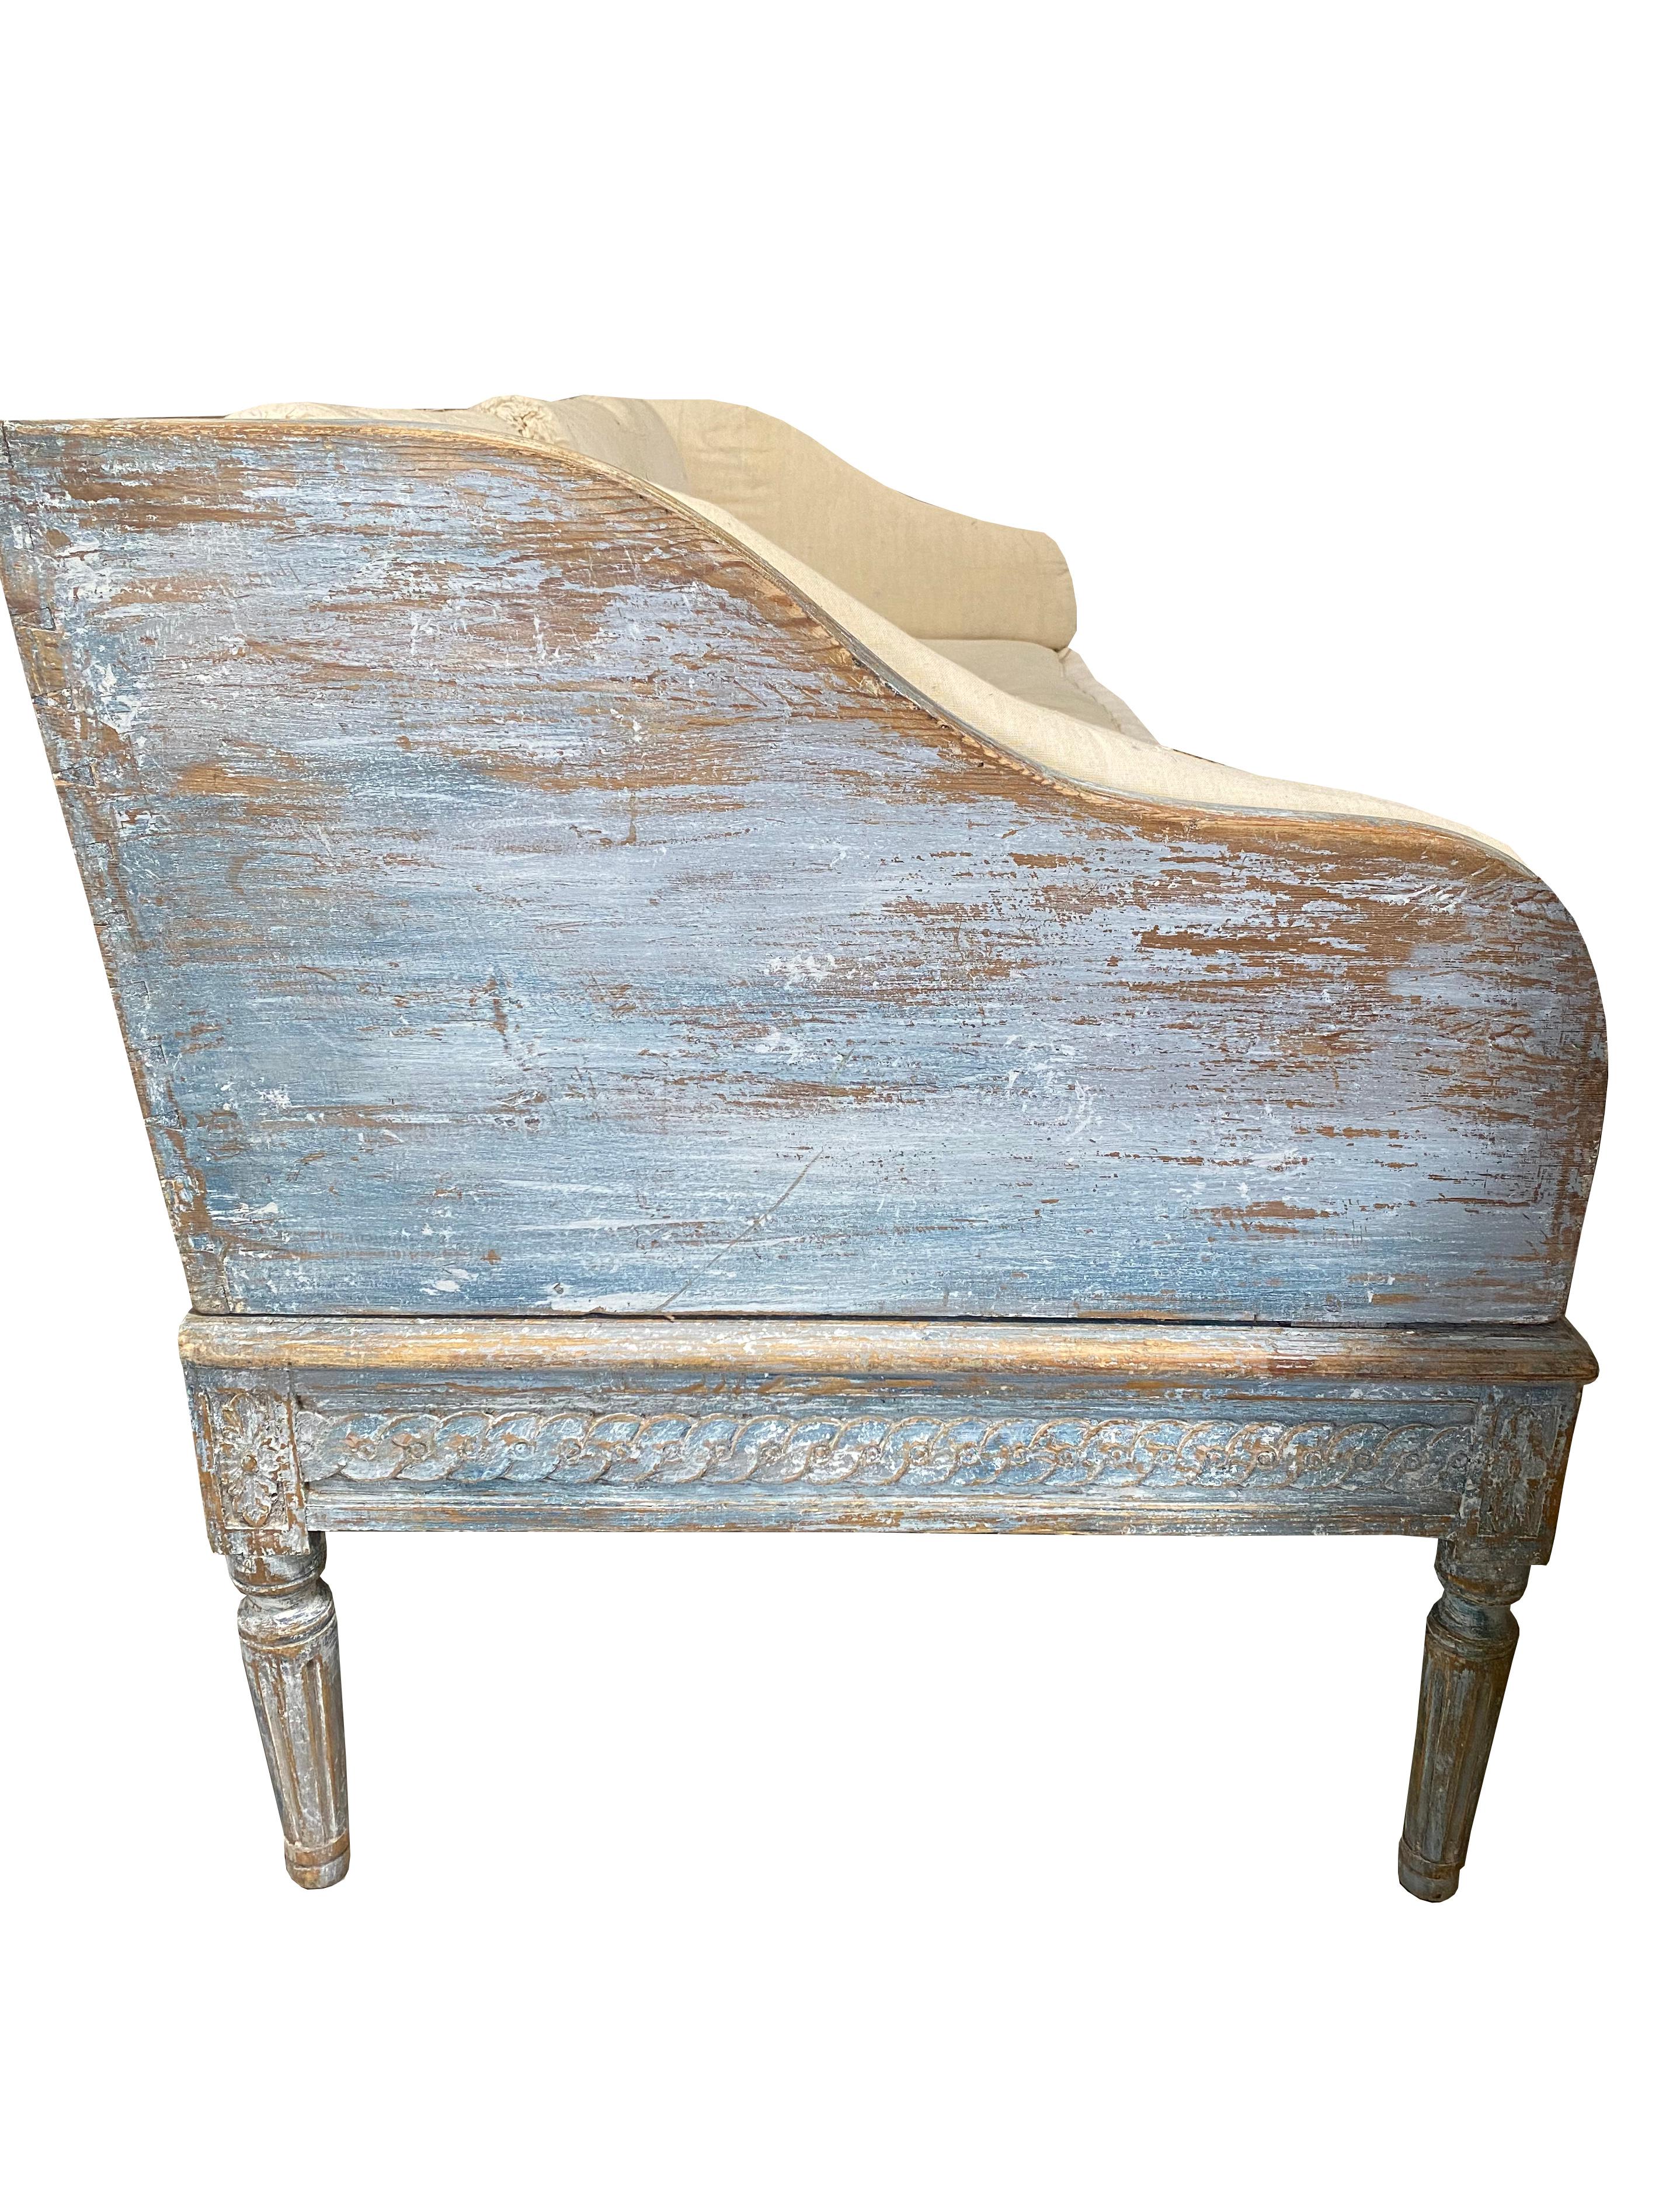 Swedish Simplicity at its best. This early 19th century Swedish Gustavian sofa is classic yet modern. It has the perfect Swedish simple curves and straight lines. The paint is original with touch ups and is the palest of blues with white hues. In